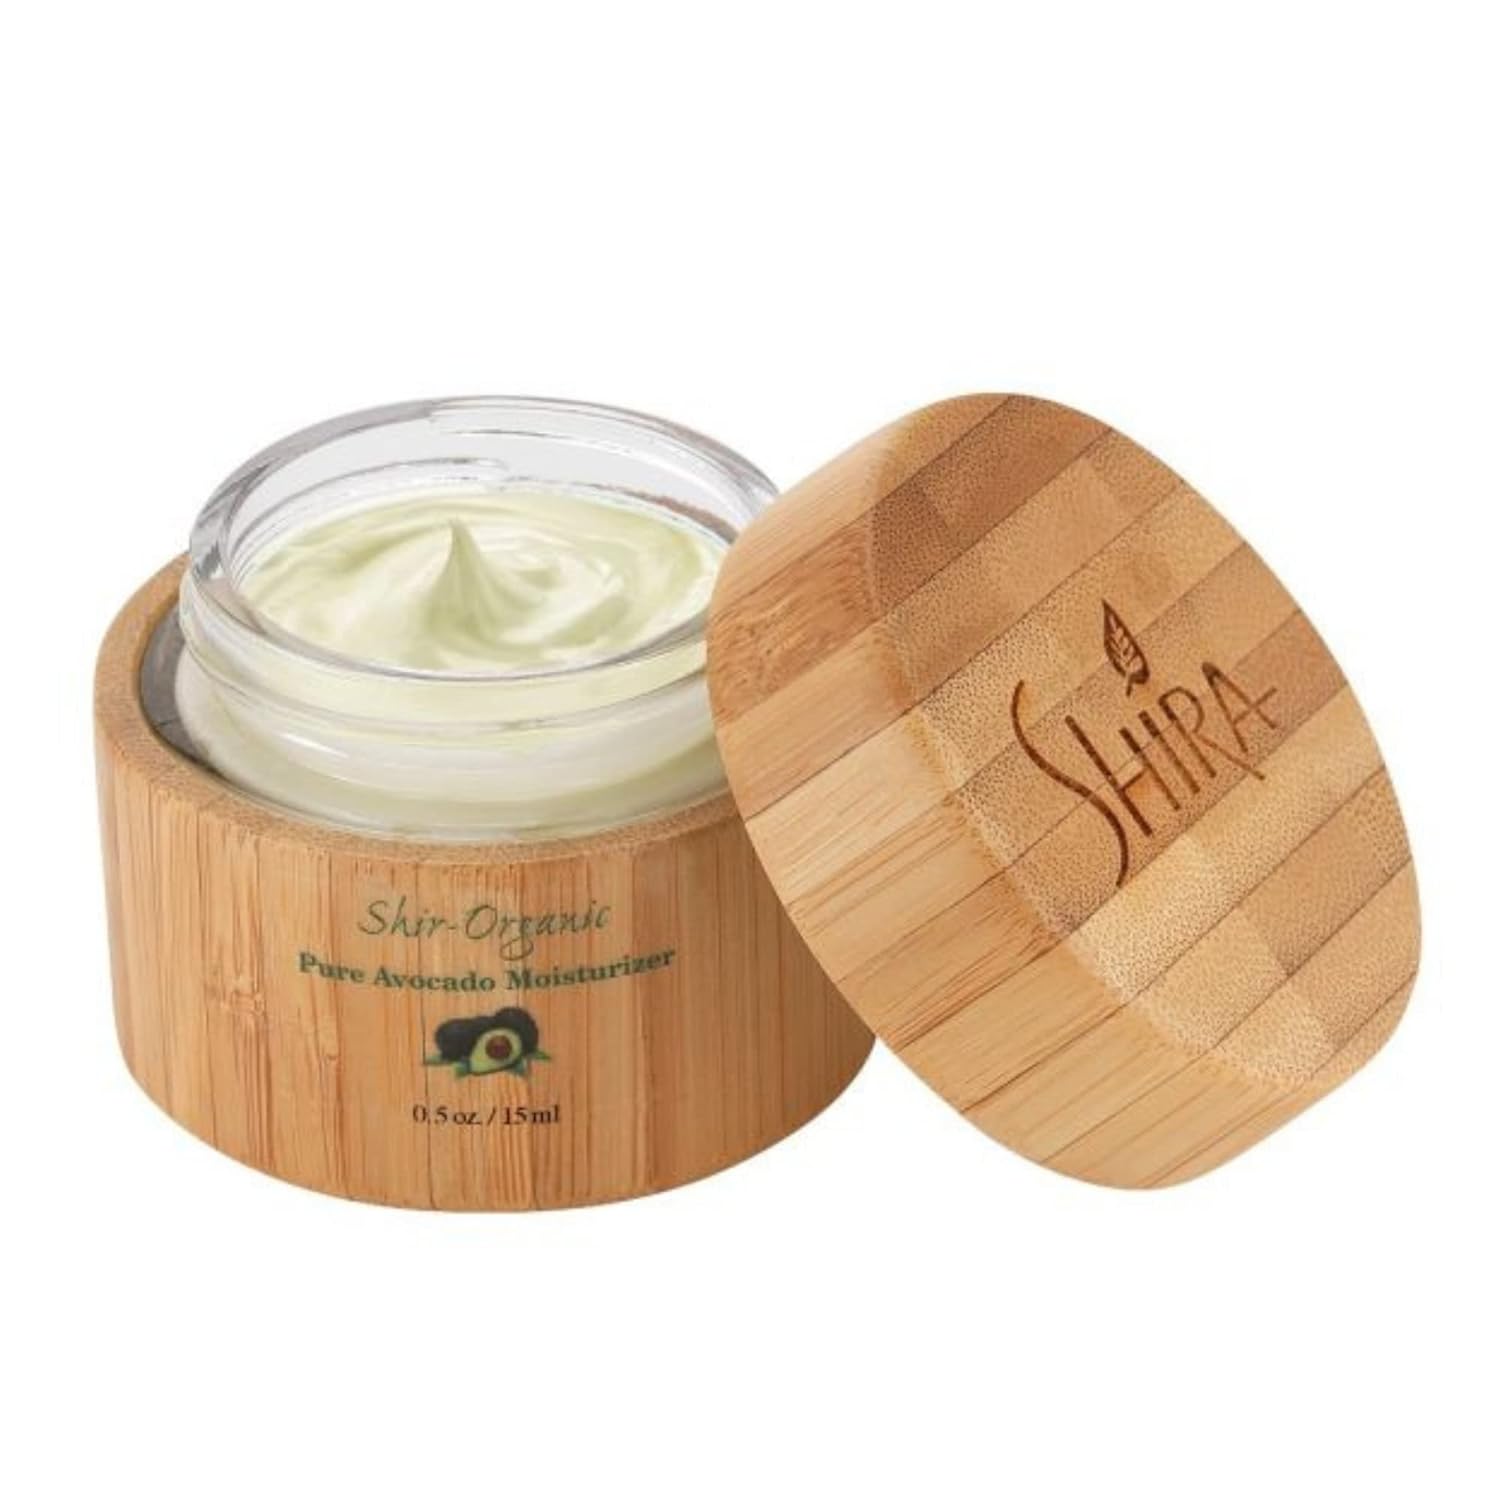 Shira Shir-Organic Avocado Moisturizer With Combination of Vitamins A B D and E For 24 hrs Hydrating And Nourished Skin 15